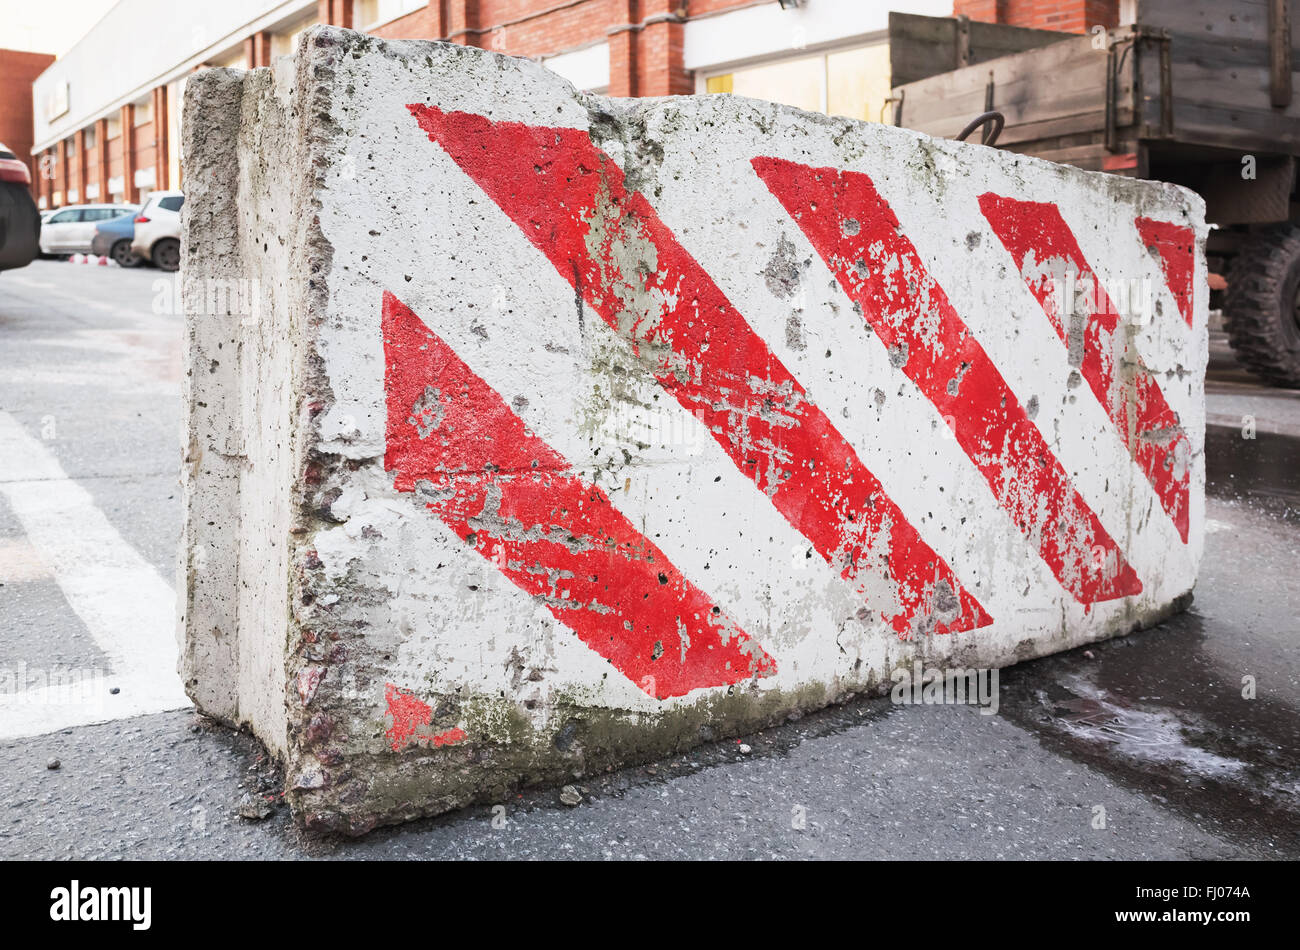 Close-up photo of concrete road block with warning red white diagonal striped pattern Stock Photo